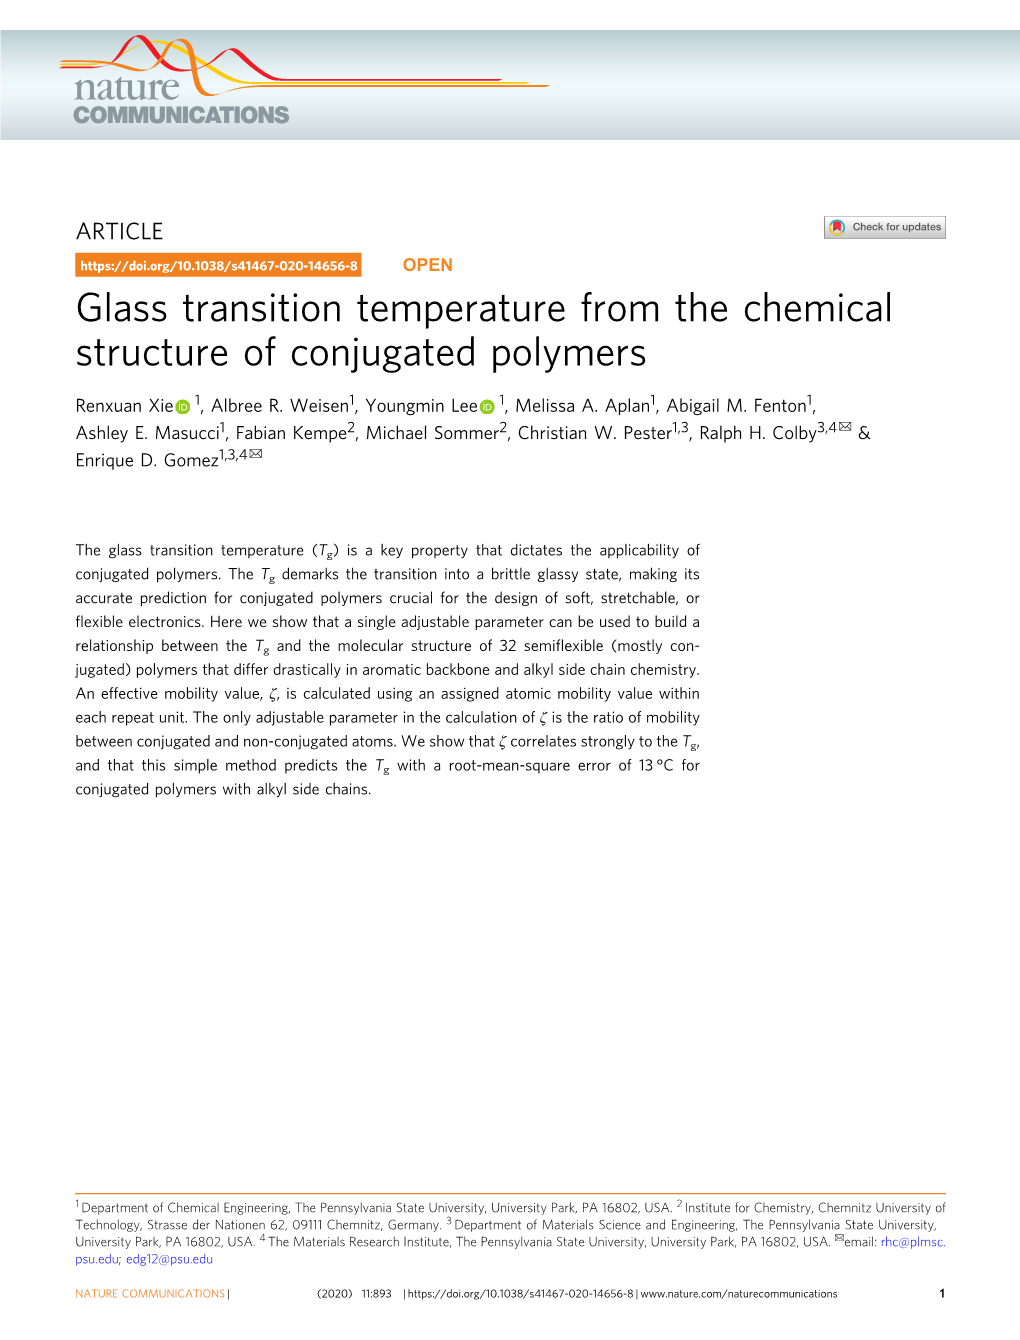 Glass Transition Temperature from the Chemical Structure of Conjugated Polymers